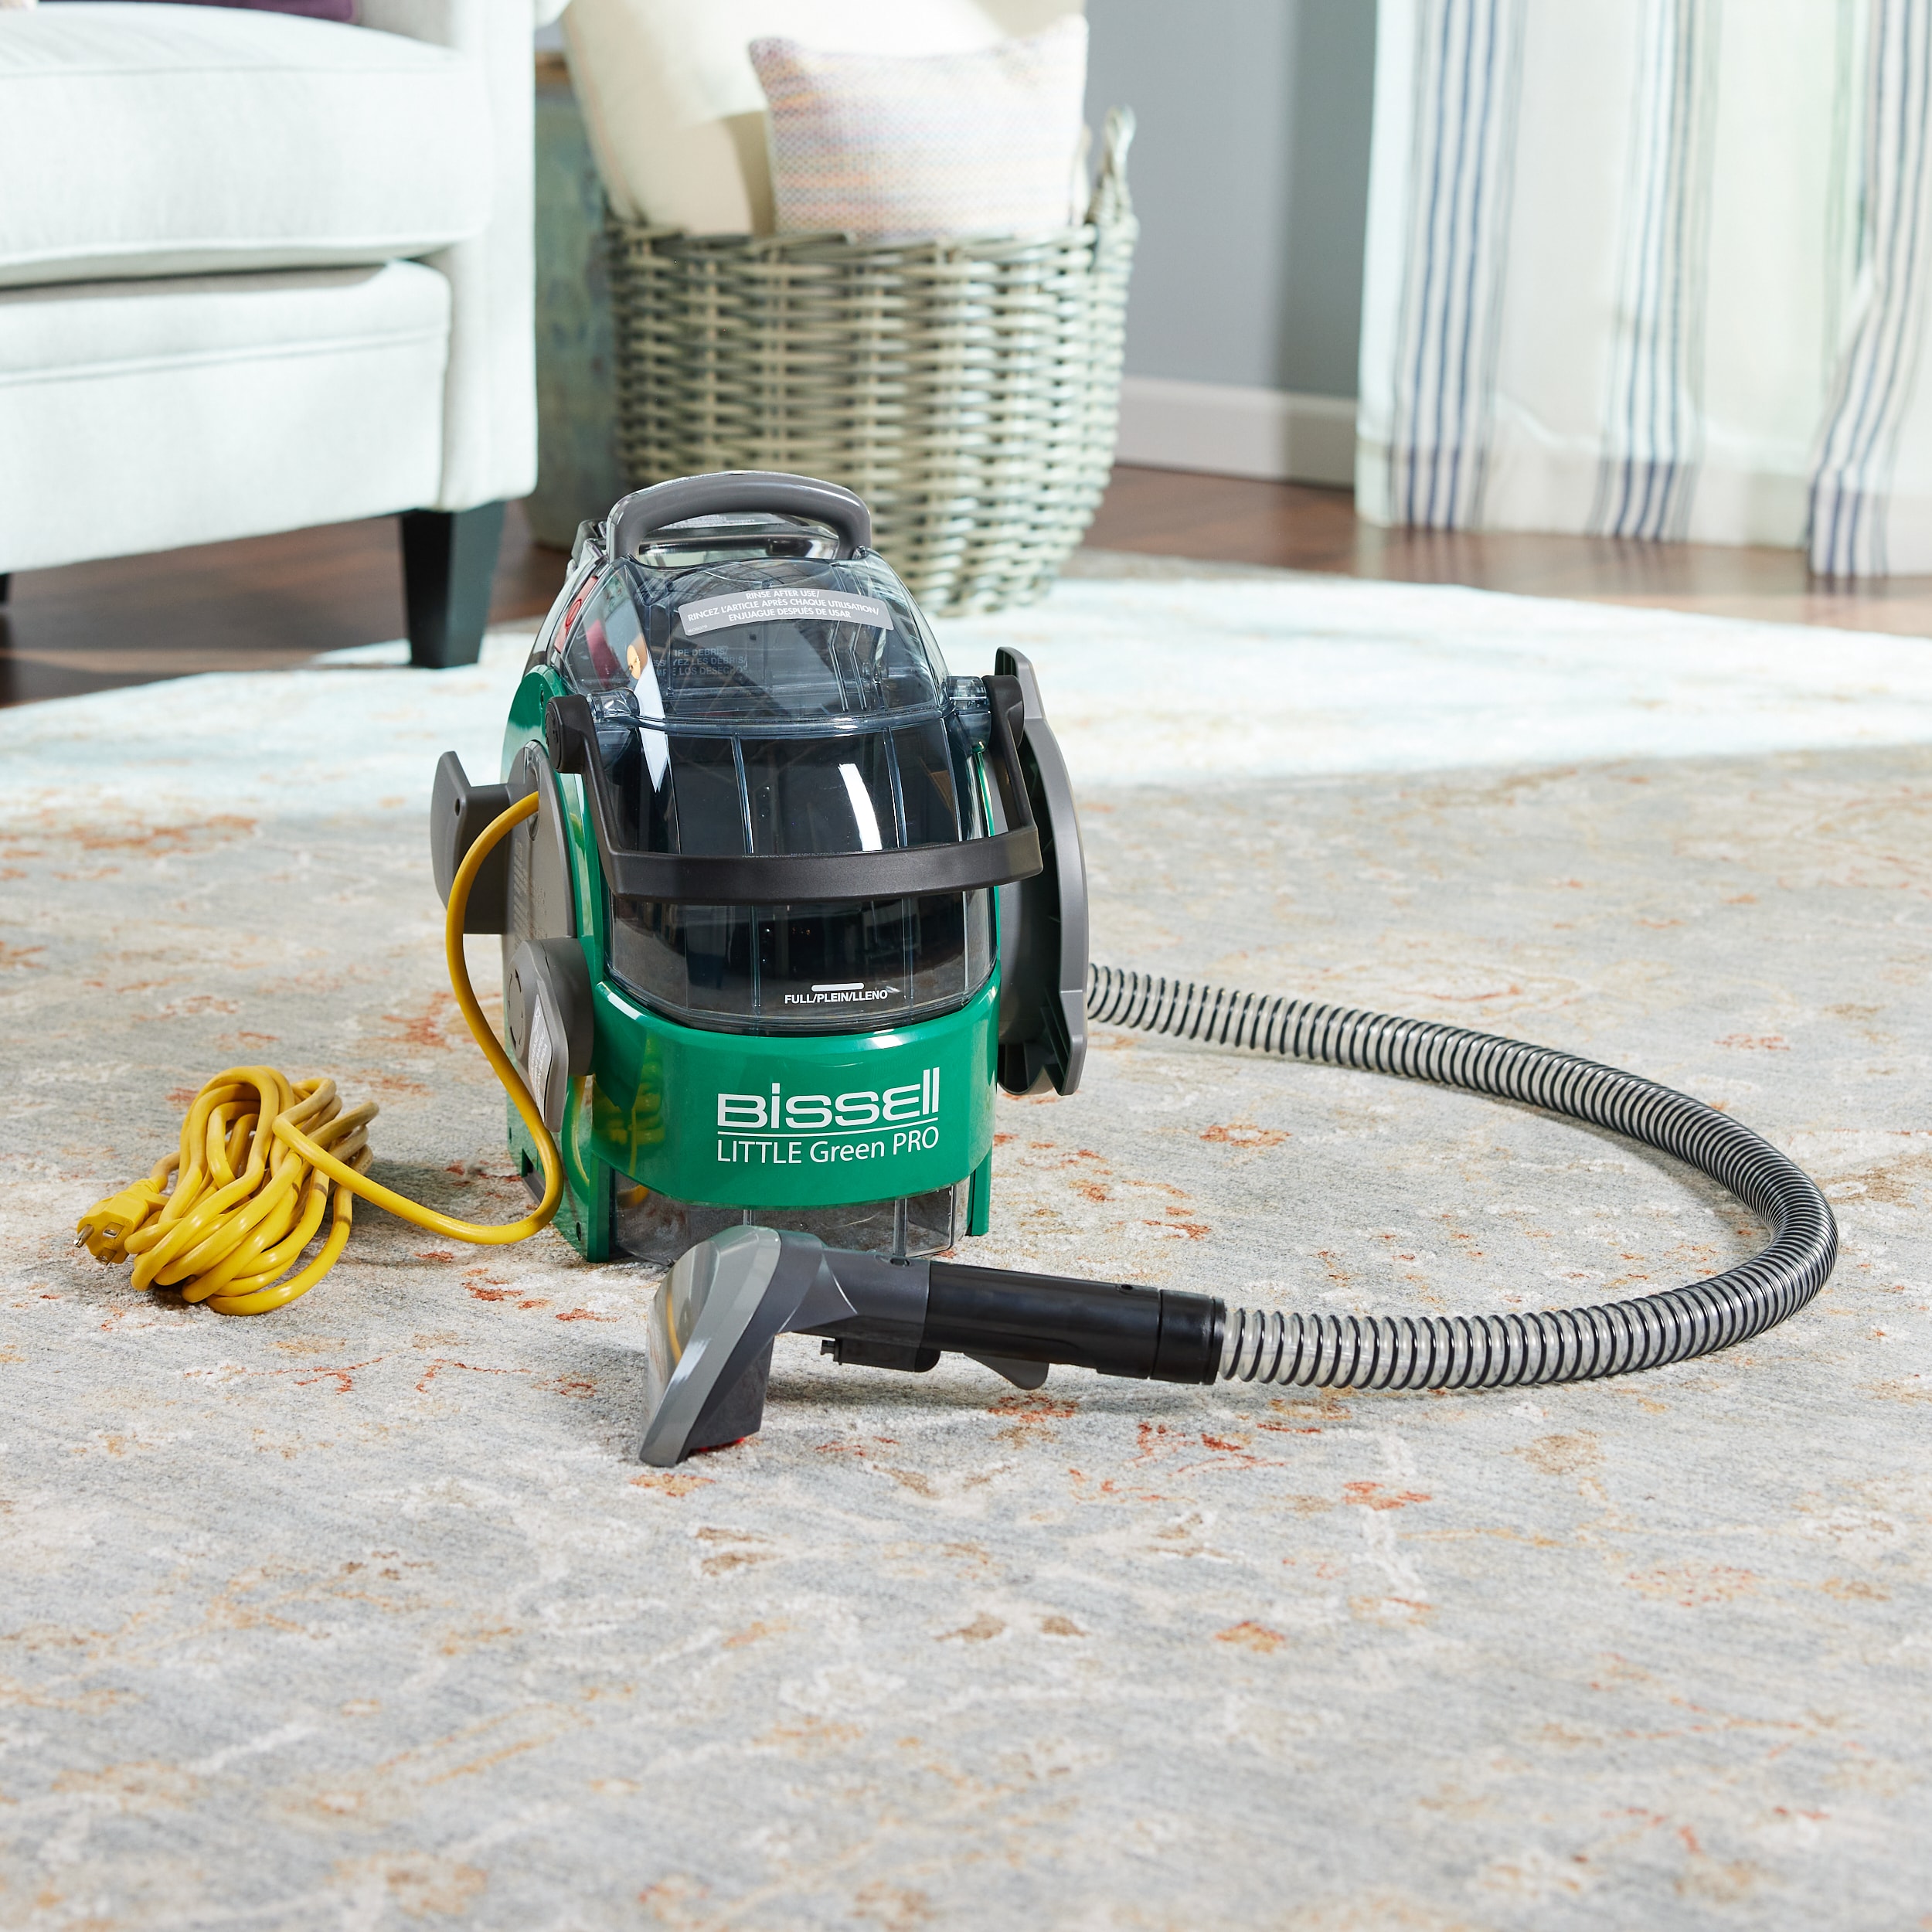 BISSELL SpotClean Pro  Our Most Powerful Portable Carpet Cleaner